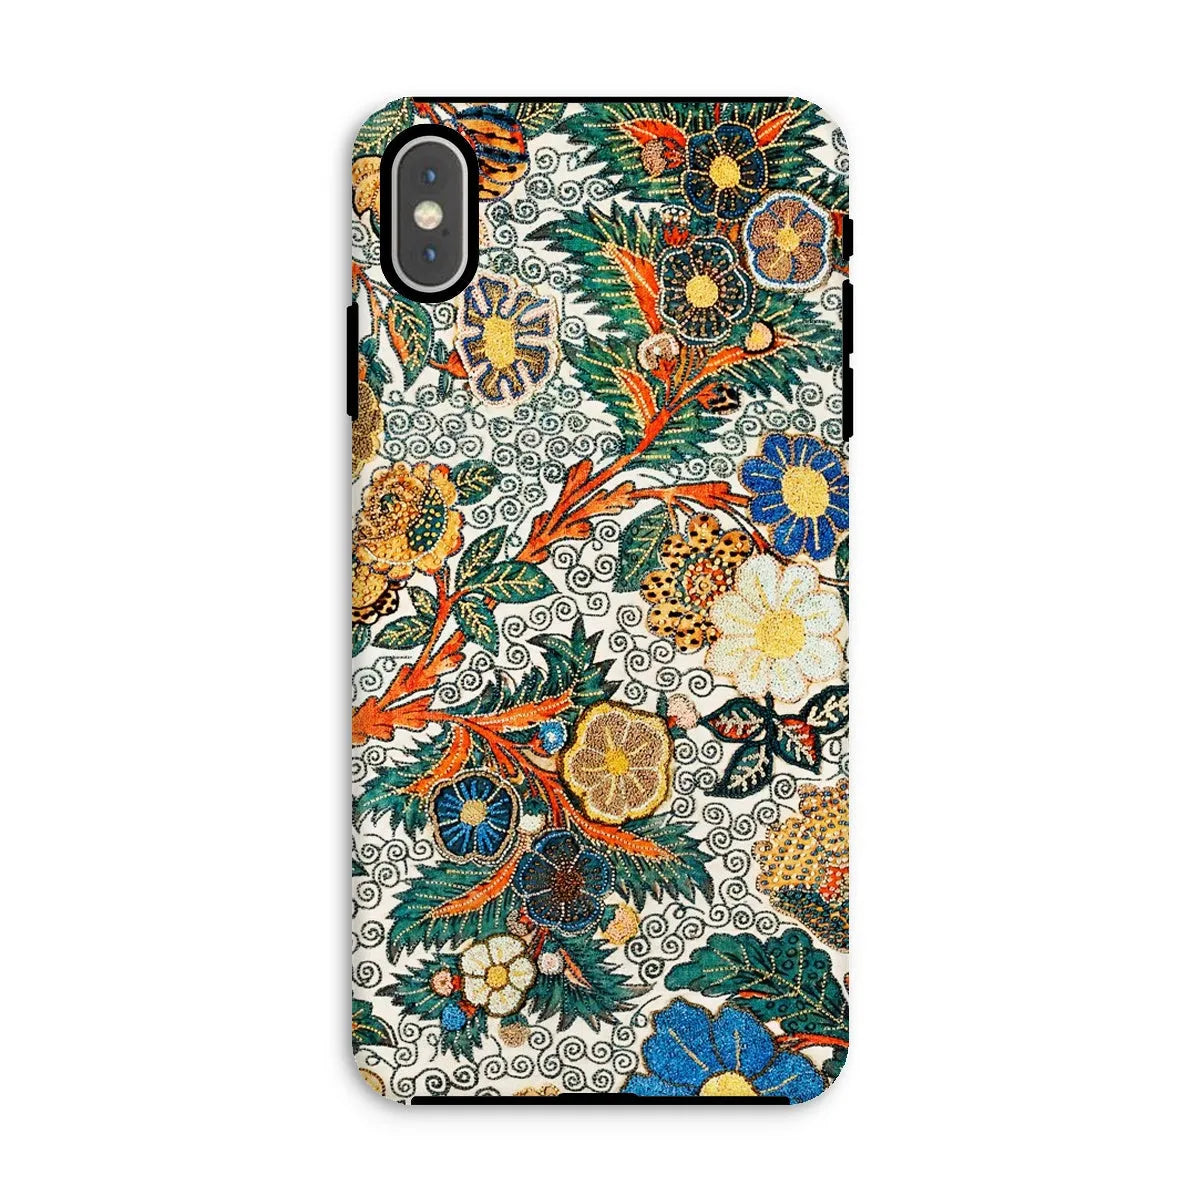 Blossomewhere Japanese Tapestry Art Phone Case - Iphone Xs Max / Matte - Mobile Phone Cases - Aesthetic Art